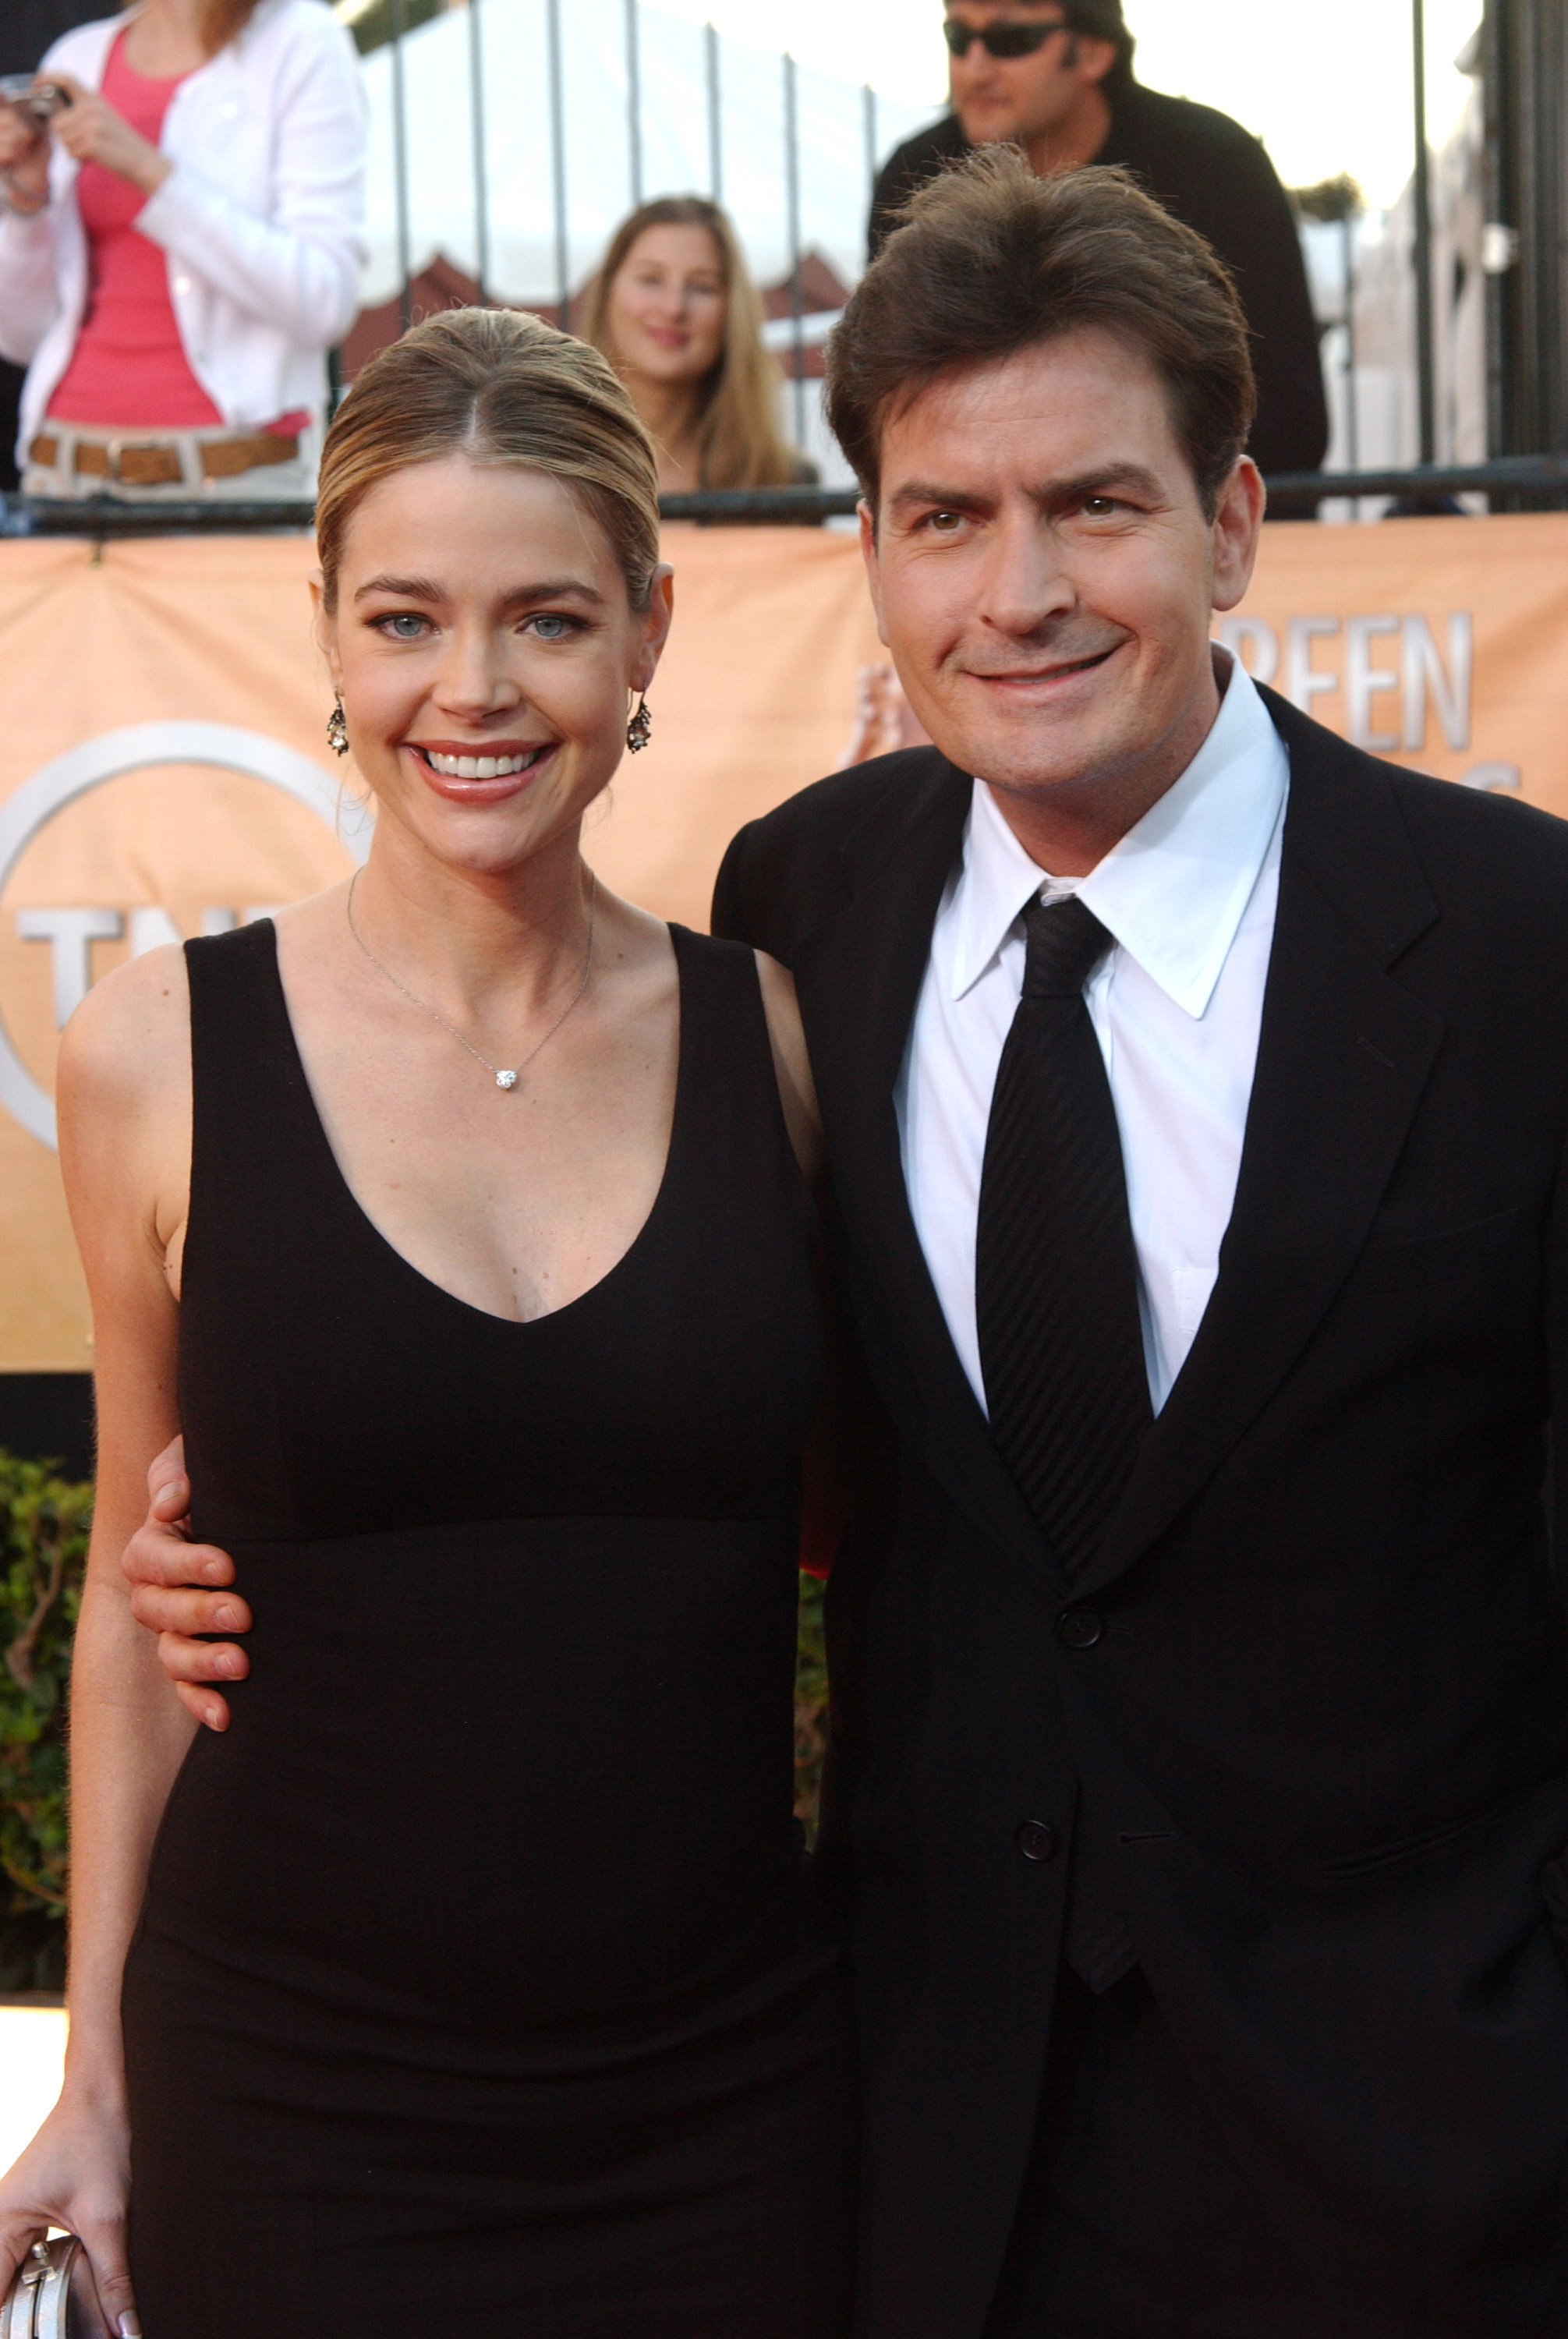 Denise Richards and Charlie Sheen at the Screen Actors Guild Awards on February 5, 2005. | Source: Getty Images